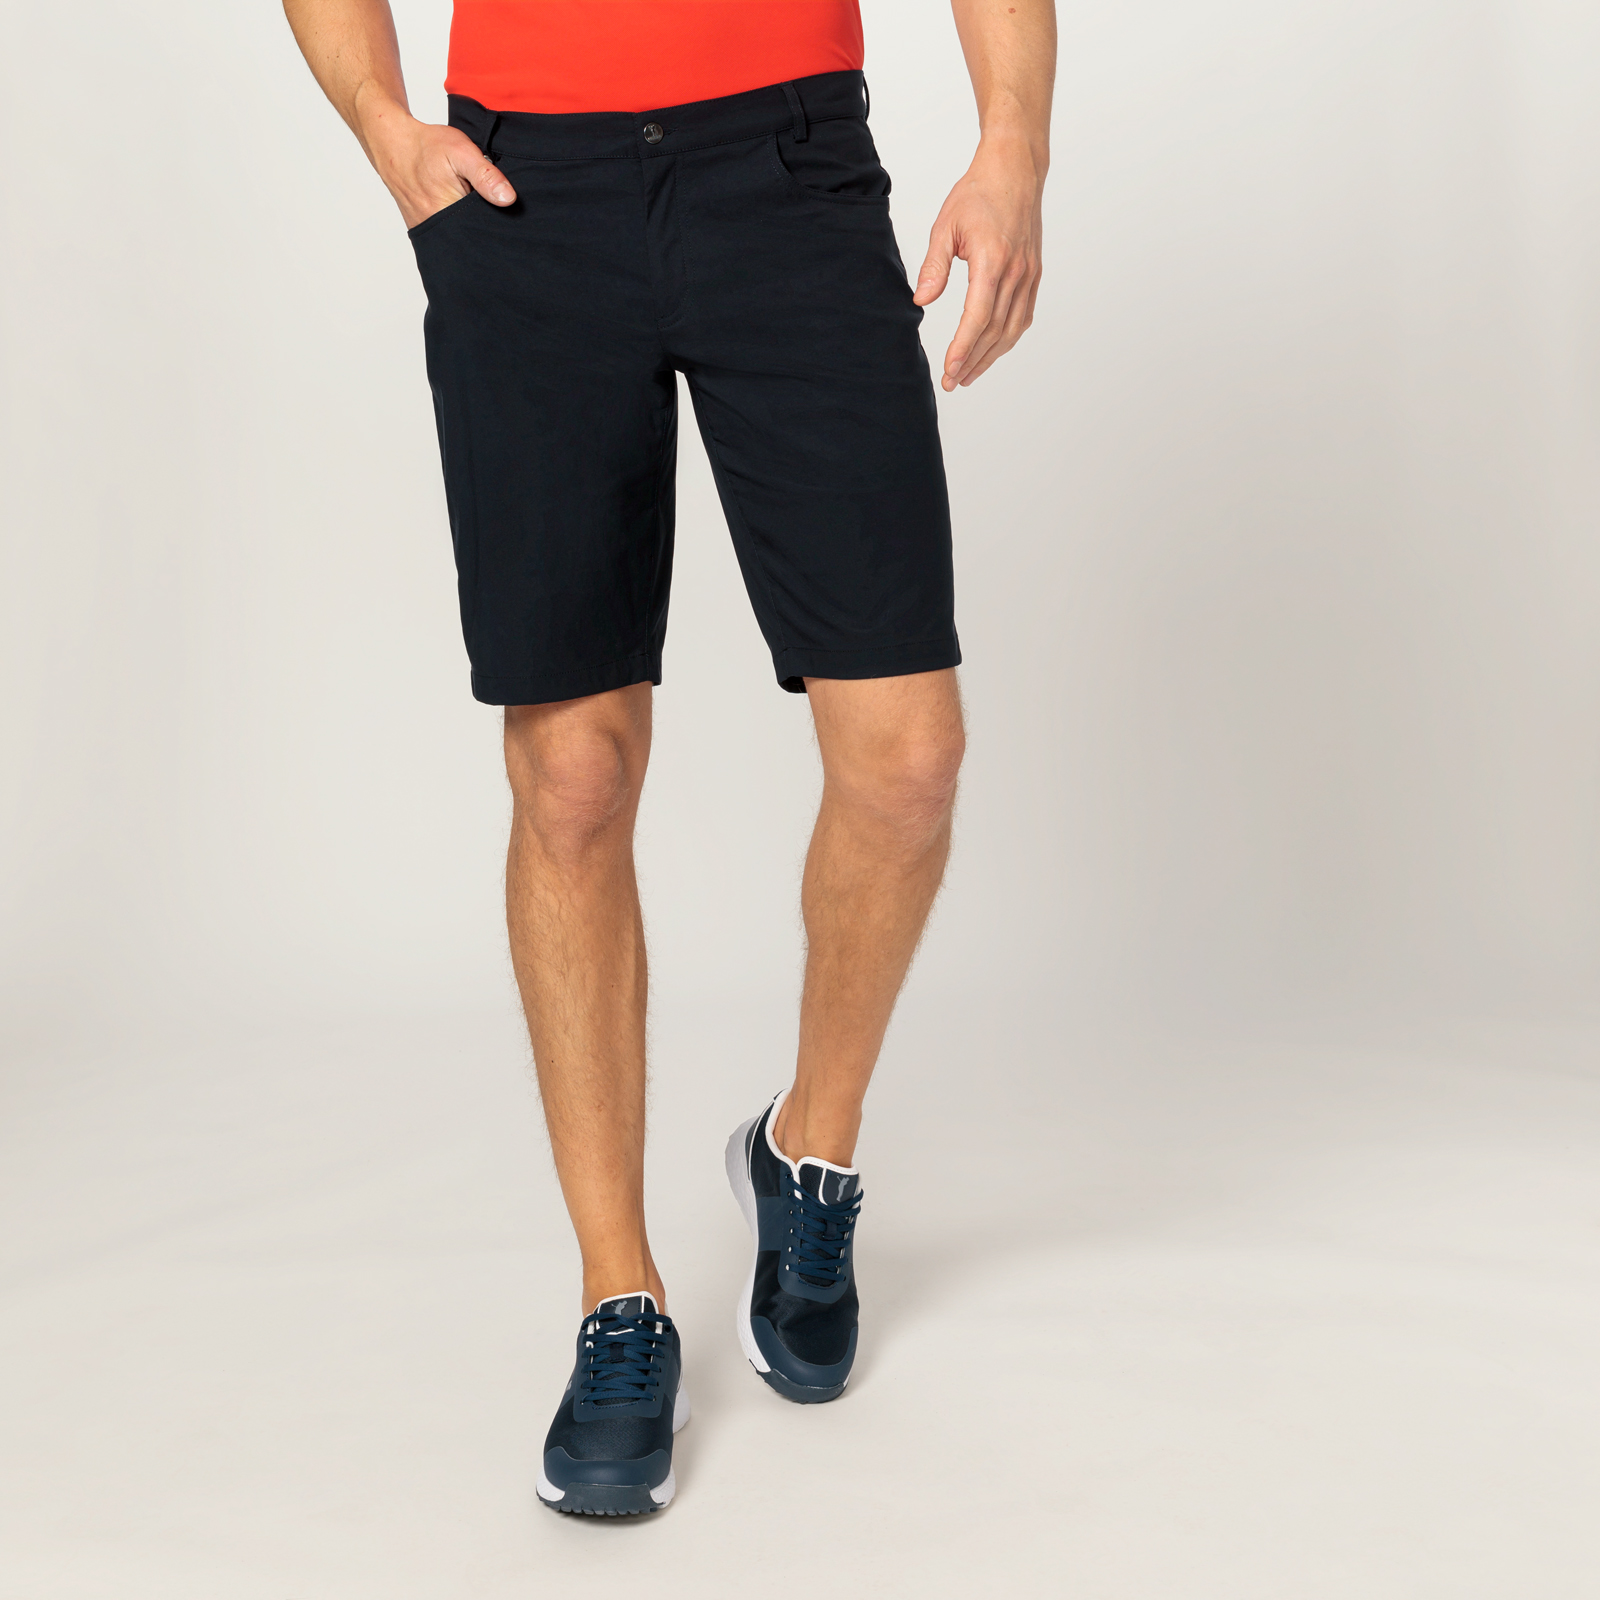 Men's golf shorts made from stretch material with sun protection function